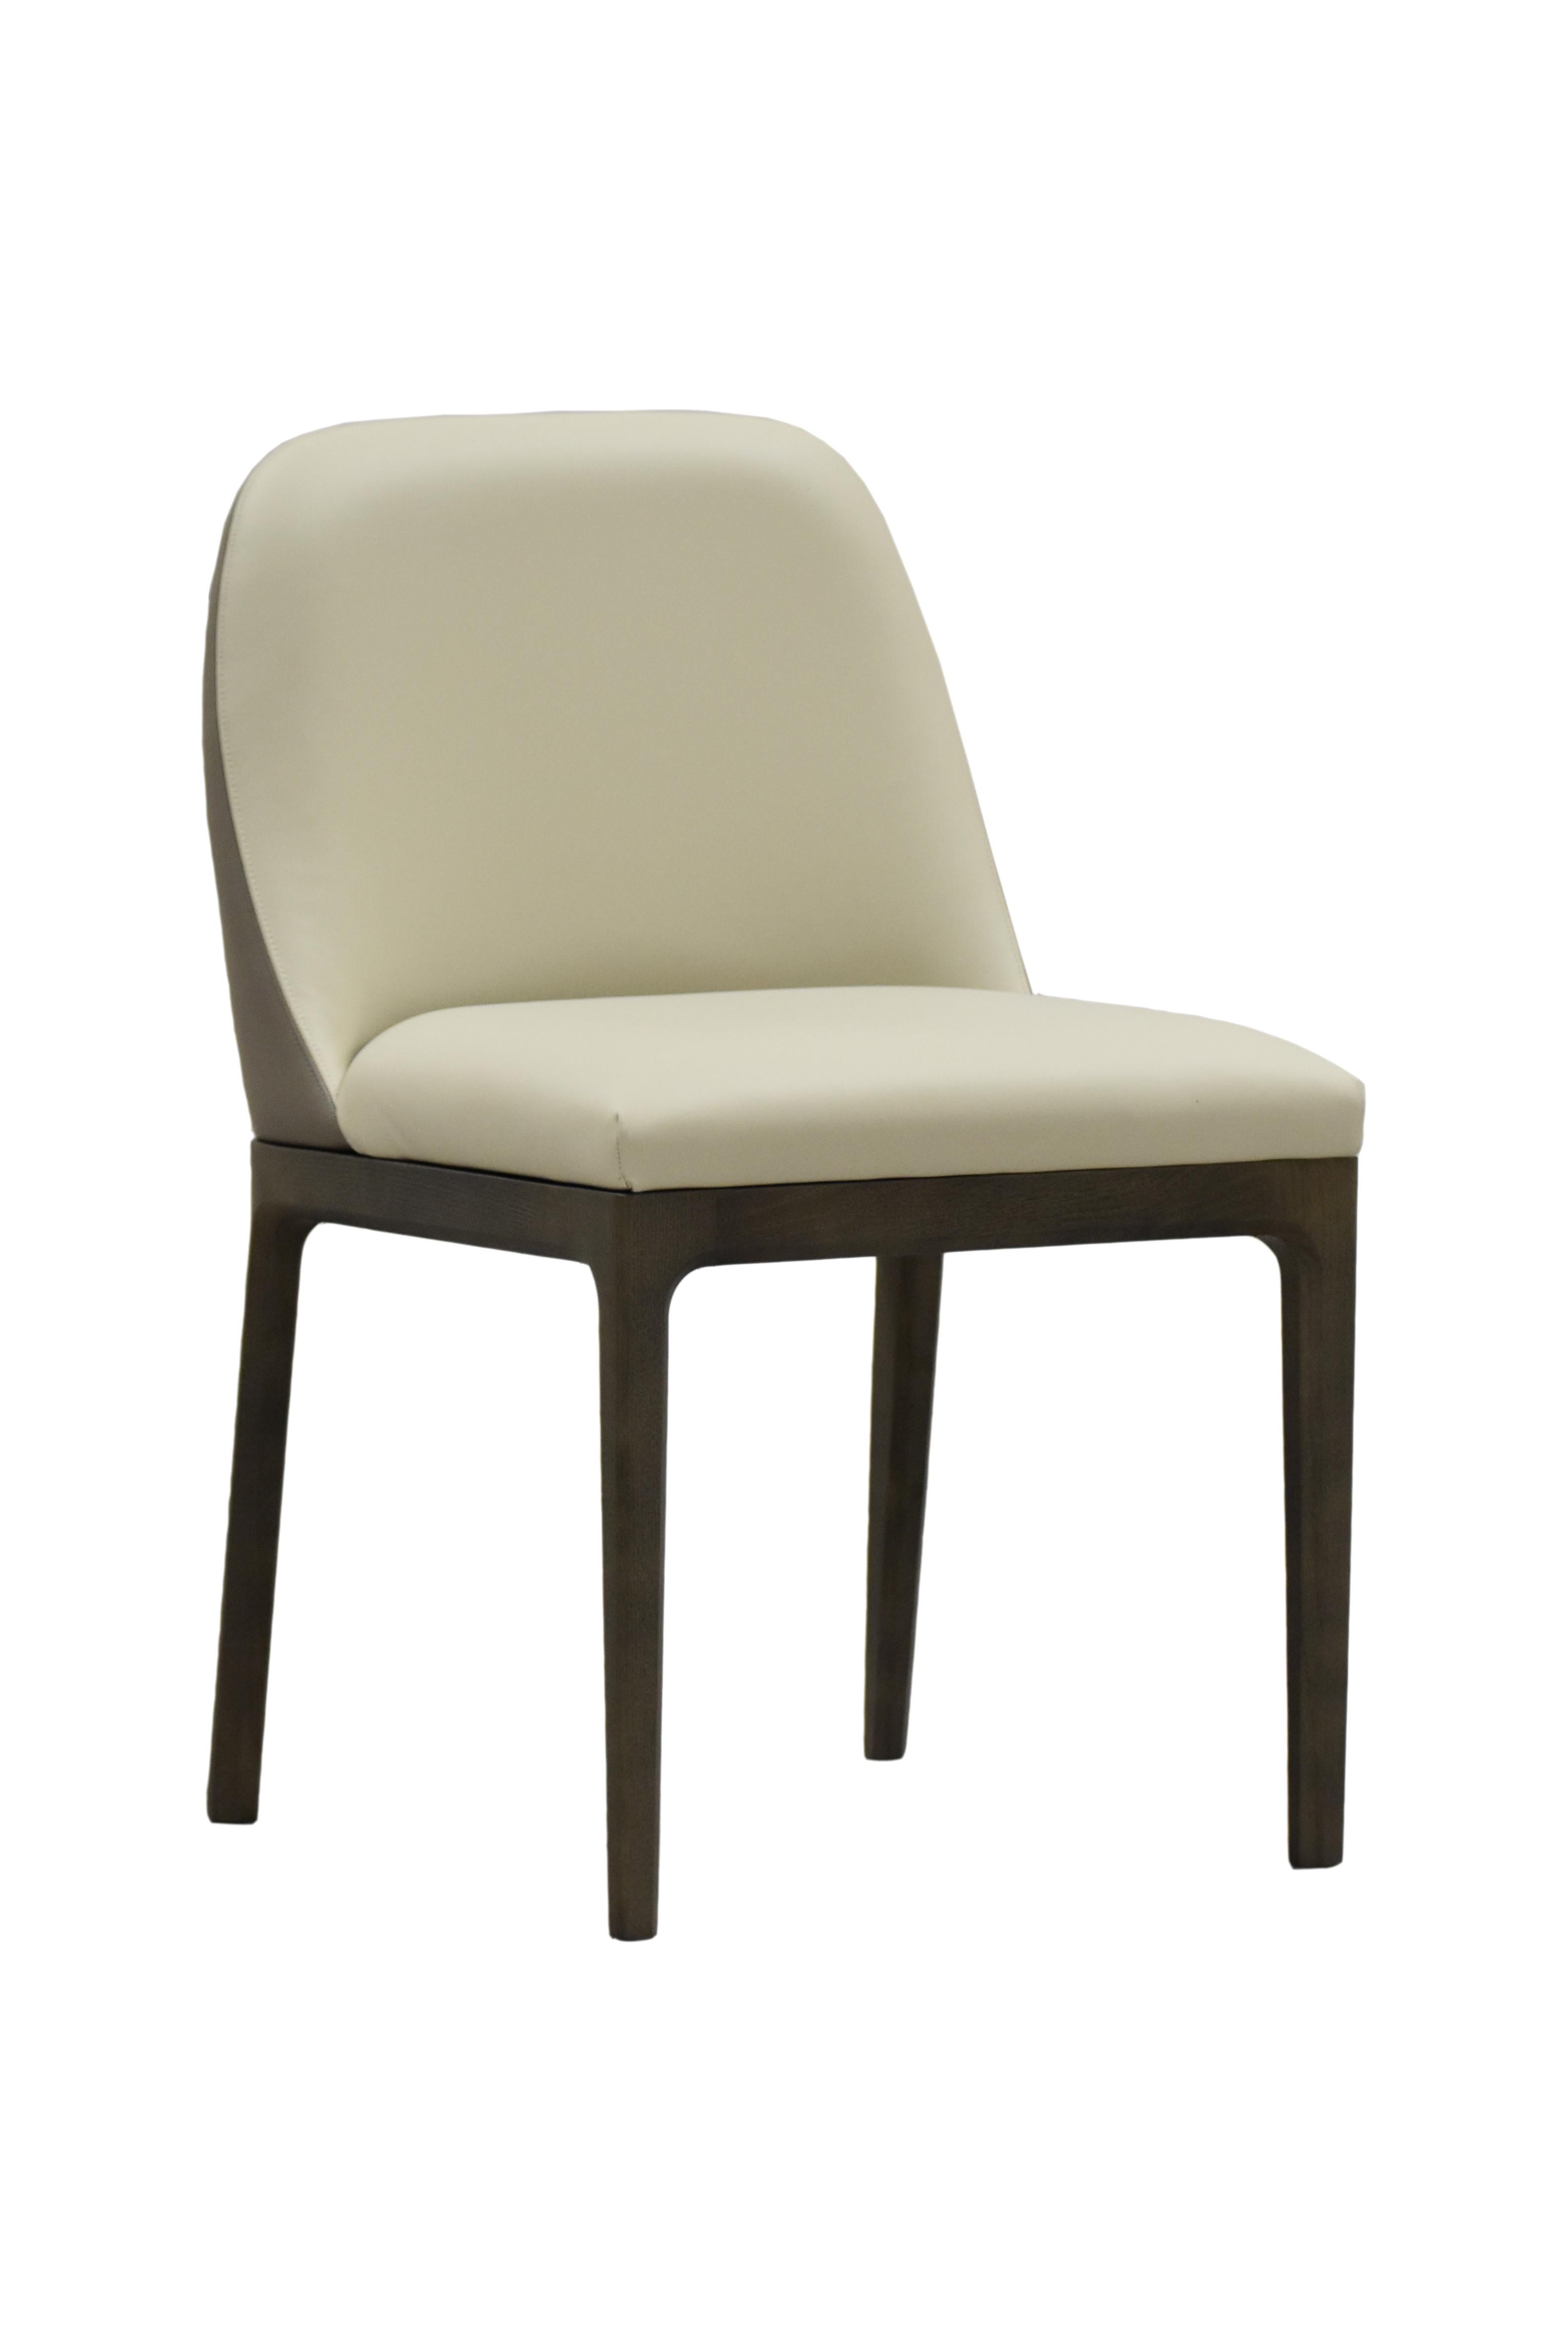 Bellagio Contemporary Upholsterd Dining Chair in Ashwood  1